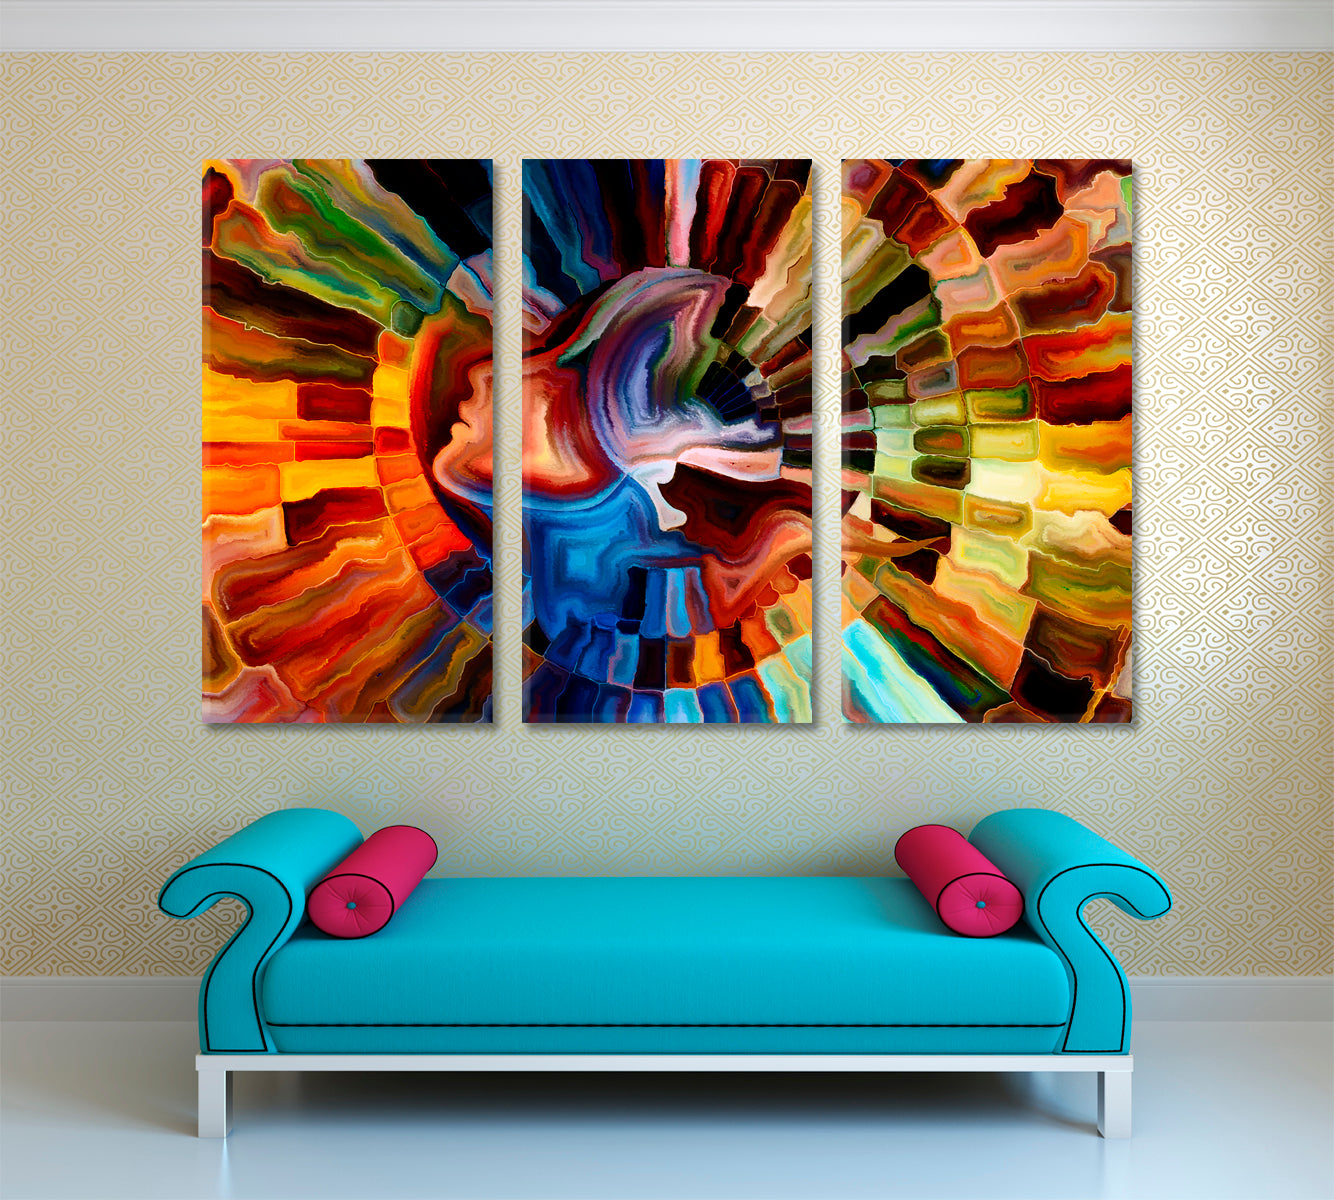 Awareness Philosophical Abstract Allegory Contemporary Art Artesty 3 panels 36" x 24" 